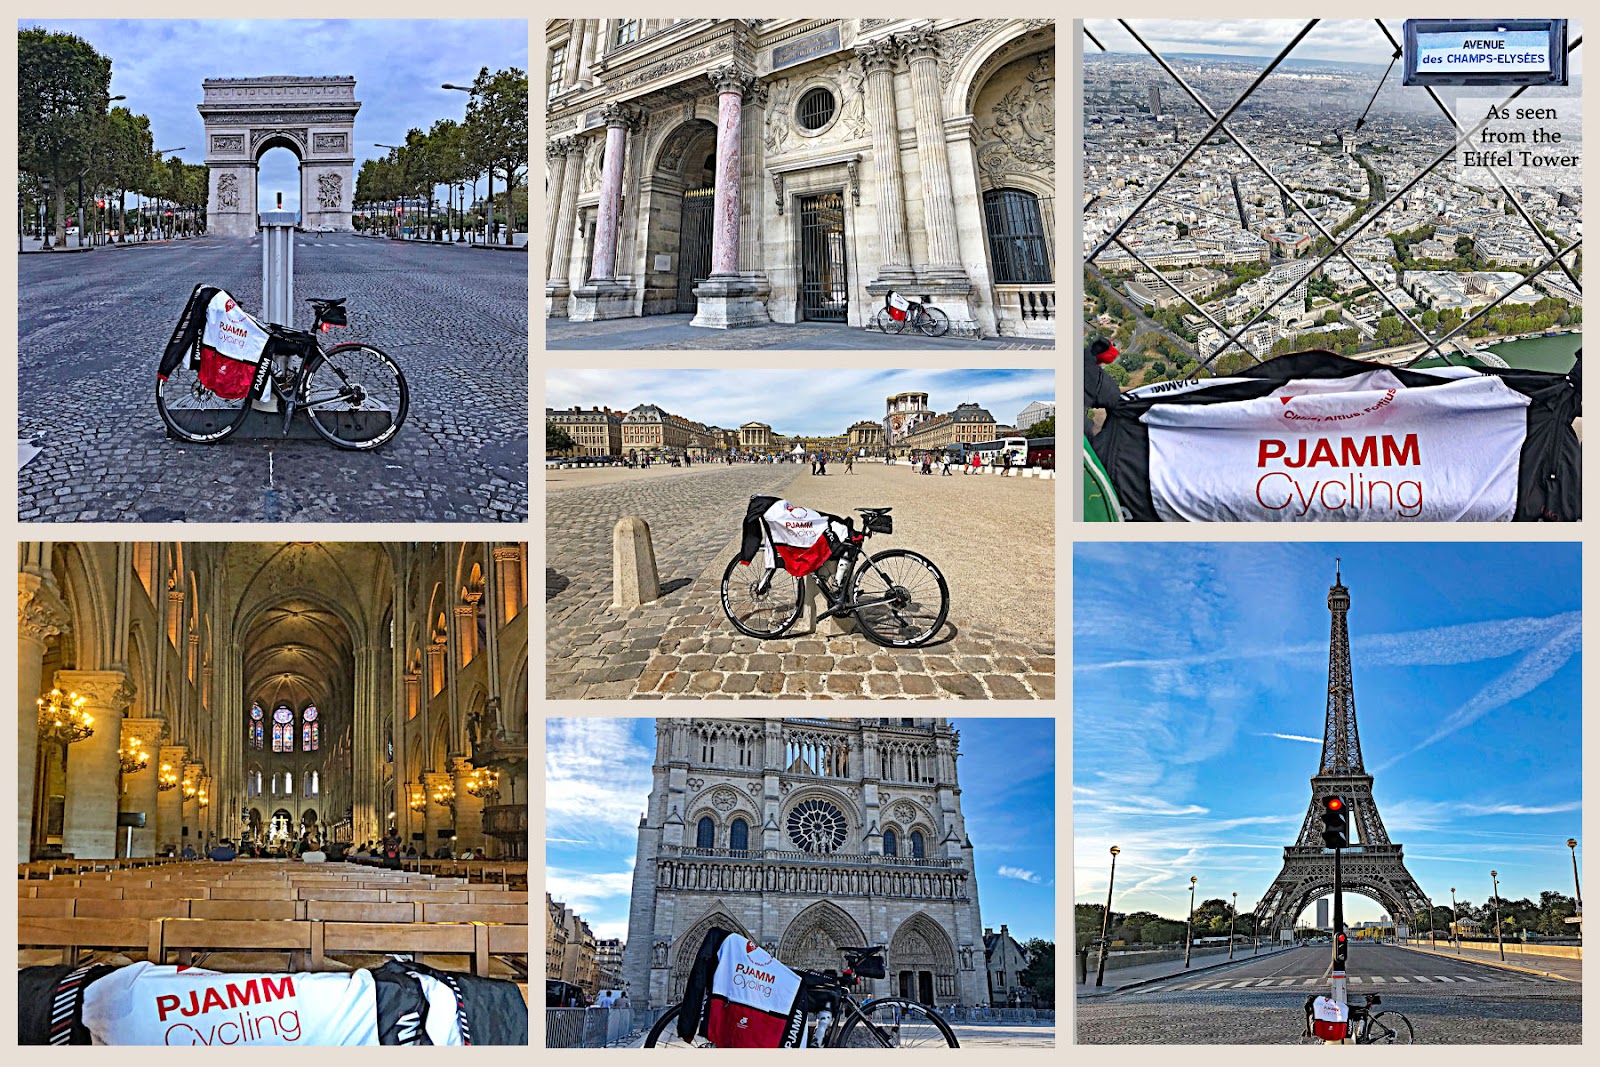 photo collage shows bike with PJAMM Cycling jersey draped over it placed in front of iconic French points of interest: Arc du Triomphe, Eiffel Tower, Notre Dam Cathedral, etc